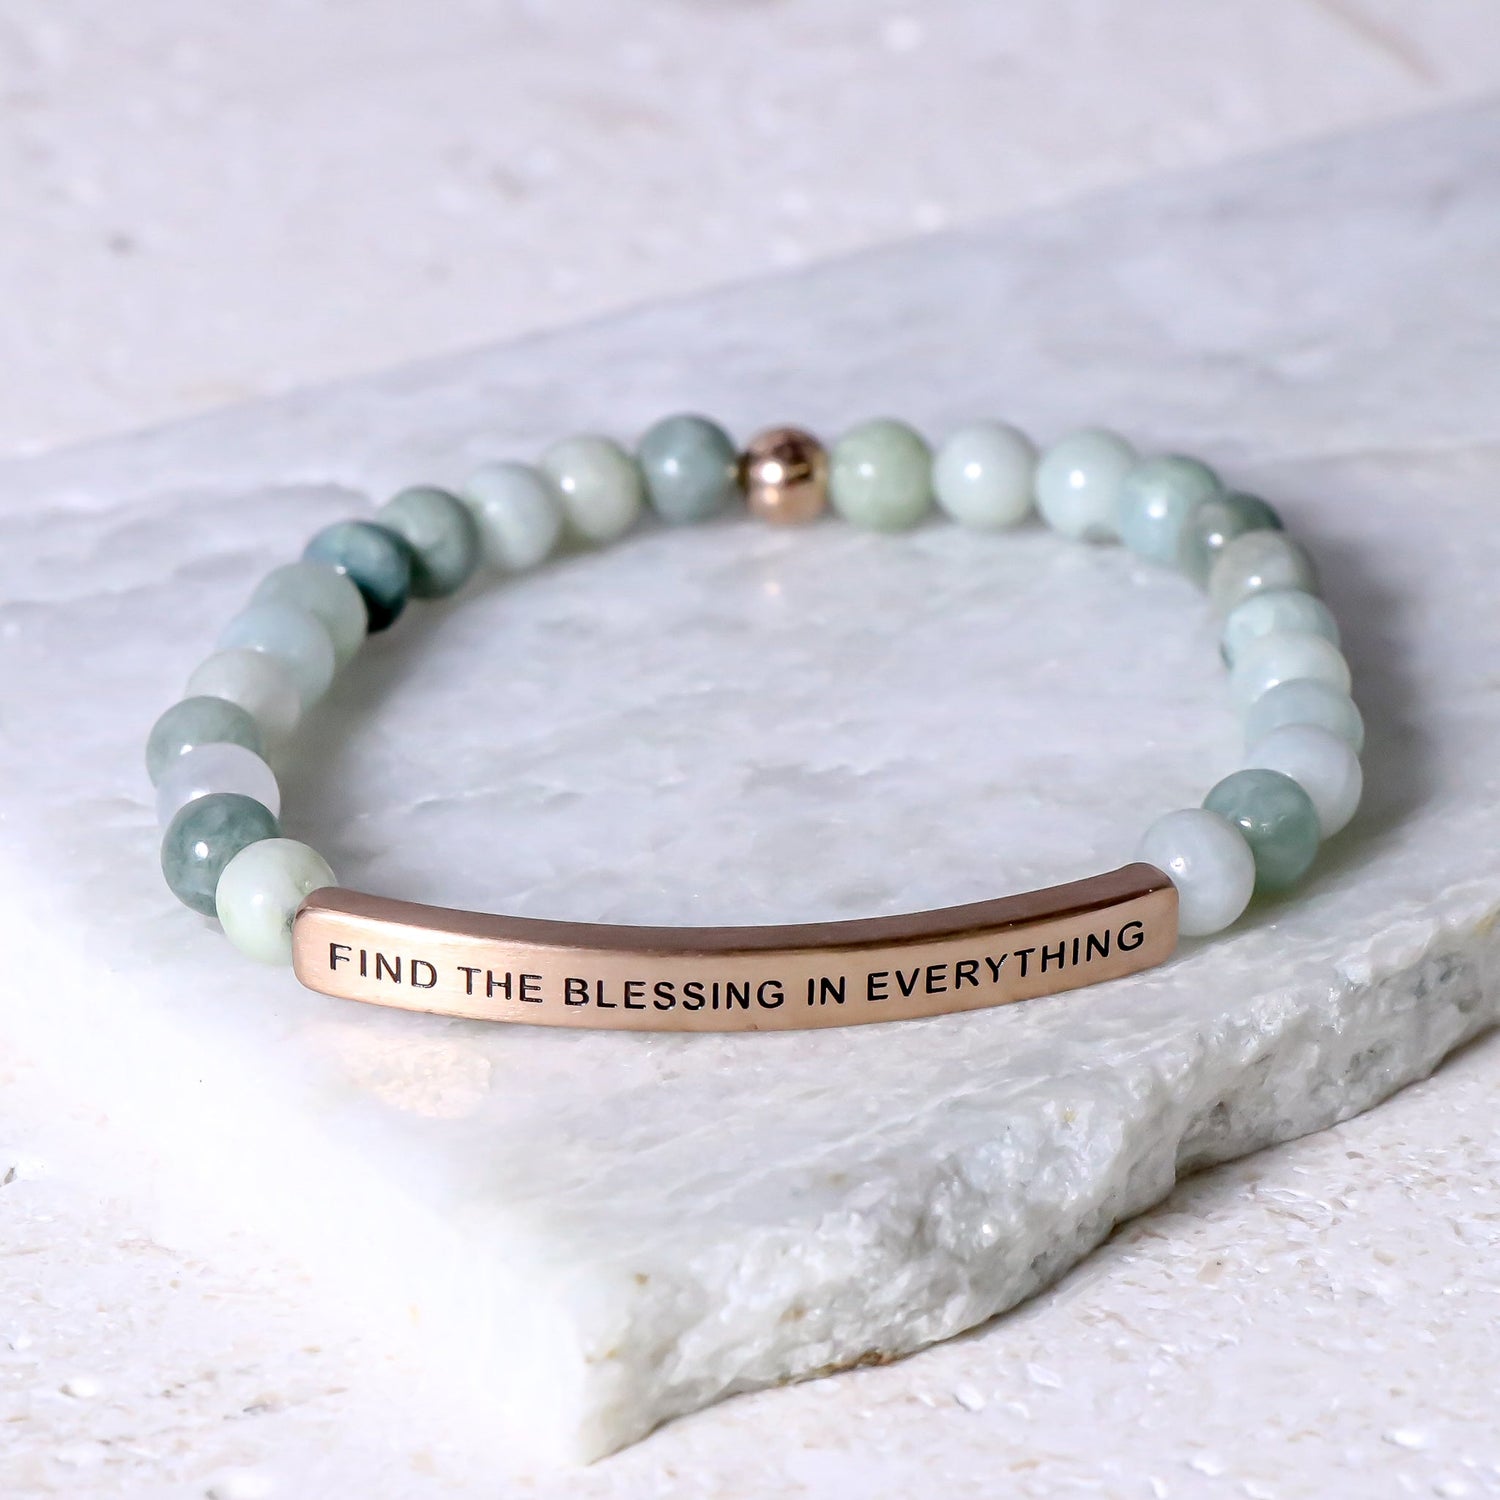 FIND THE BLESSING IN EVERYTHING - Inspiration Co.